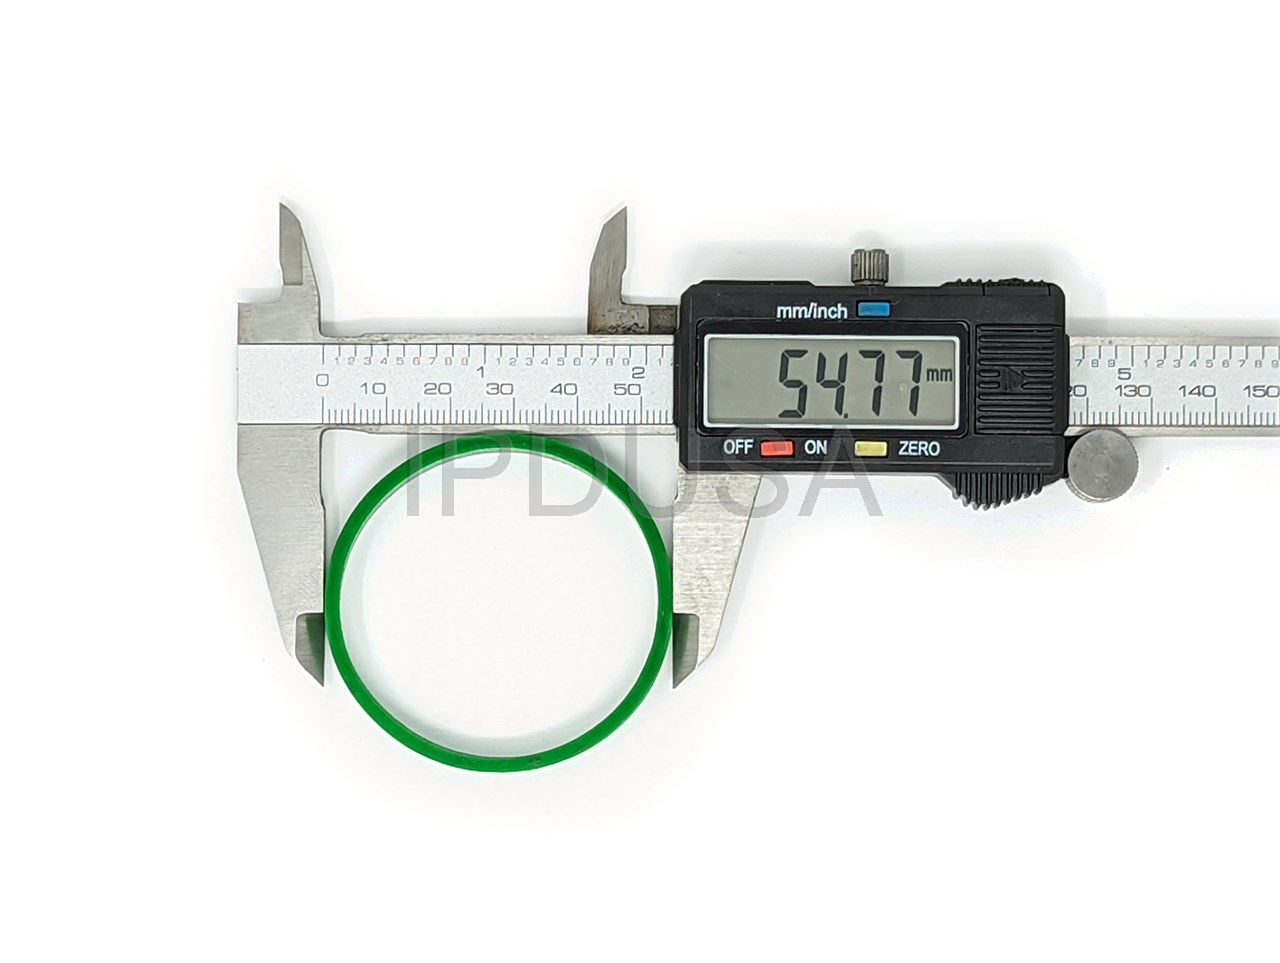 Stainless Steel PD Ruler -6 Inch